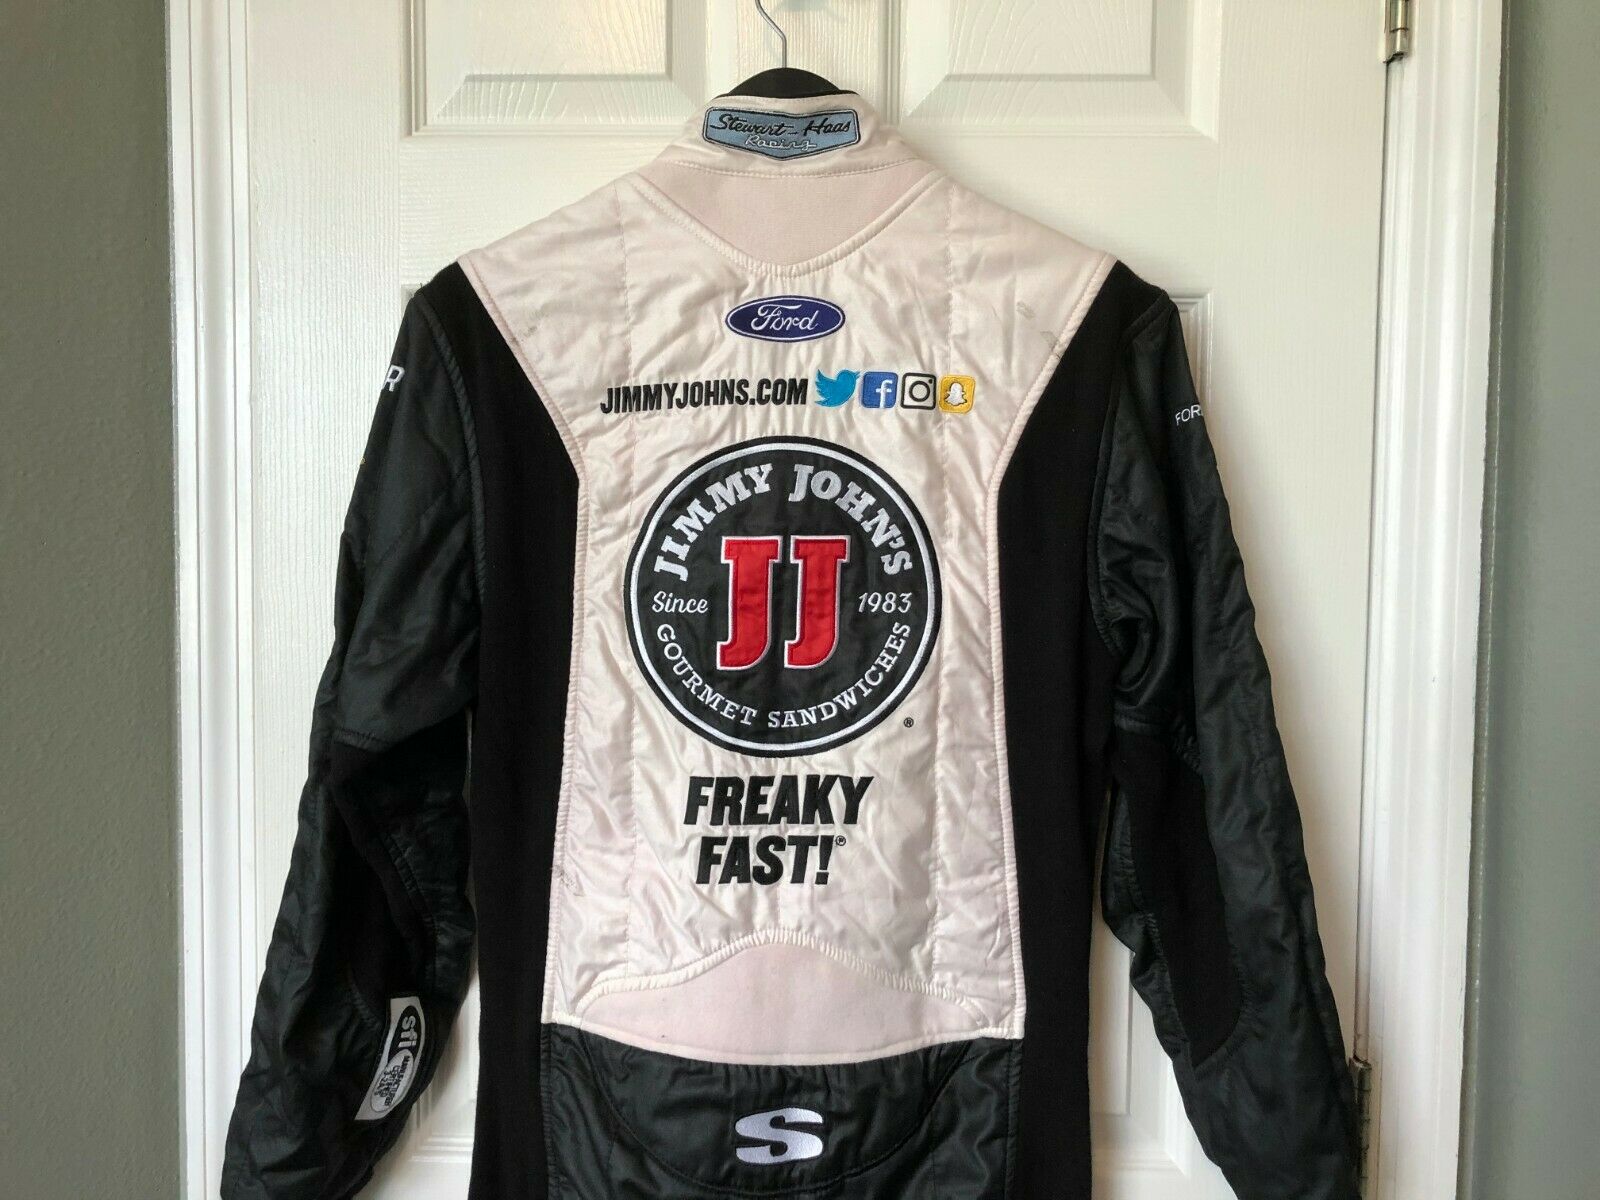 Kevin Harvick NASCAR Race Used Worn Drivers Fire Suit Jimmy Johns ...